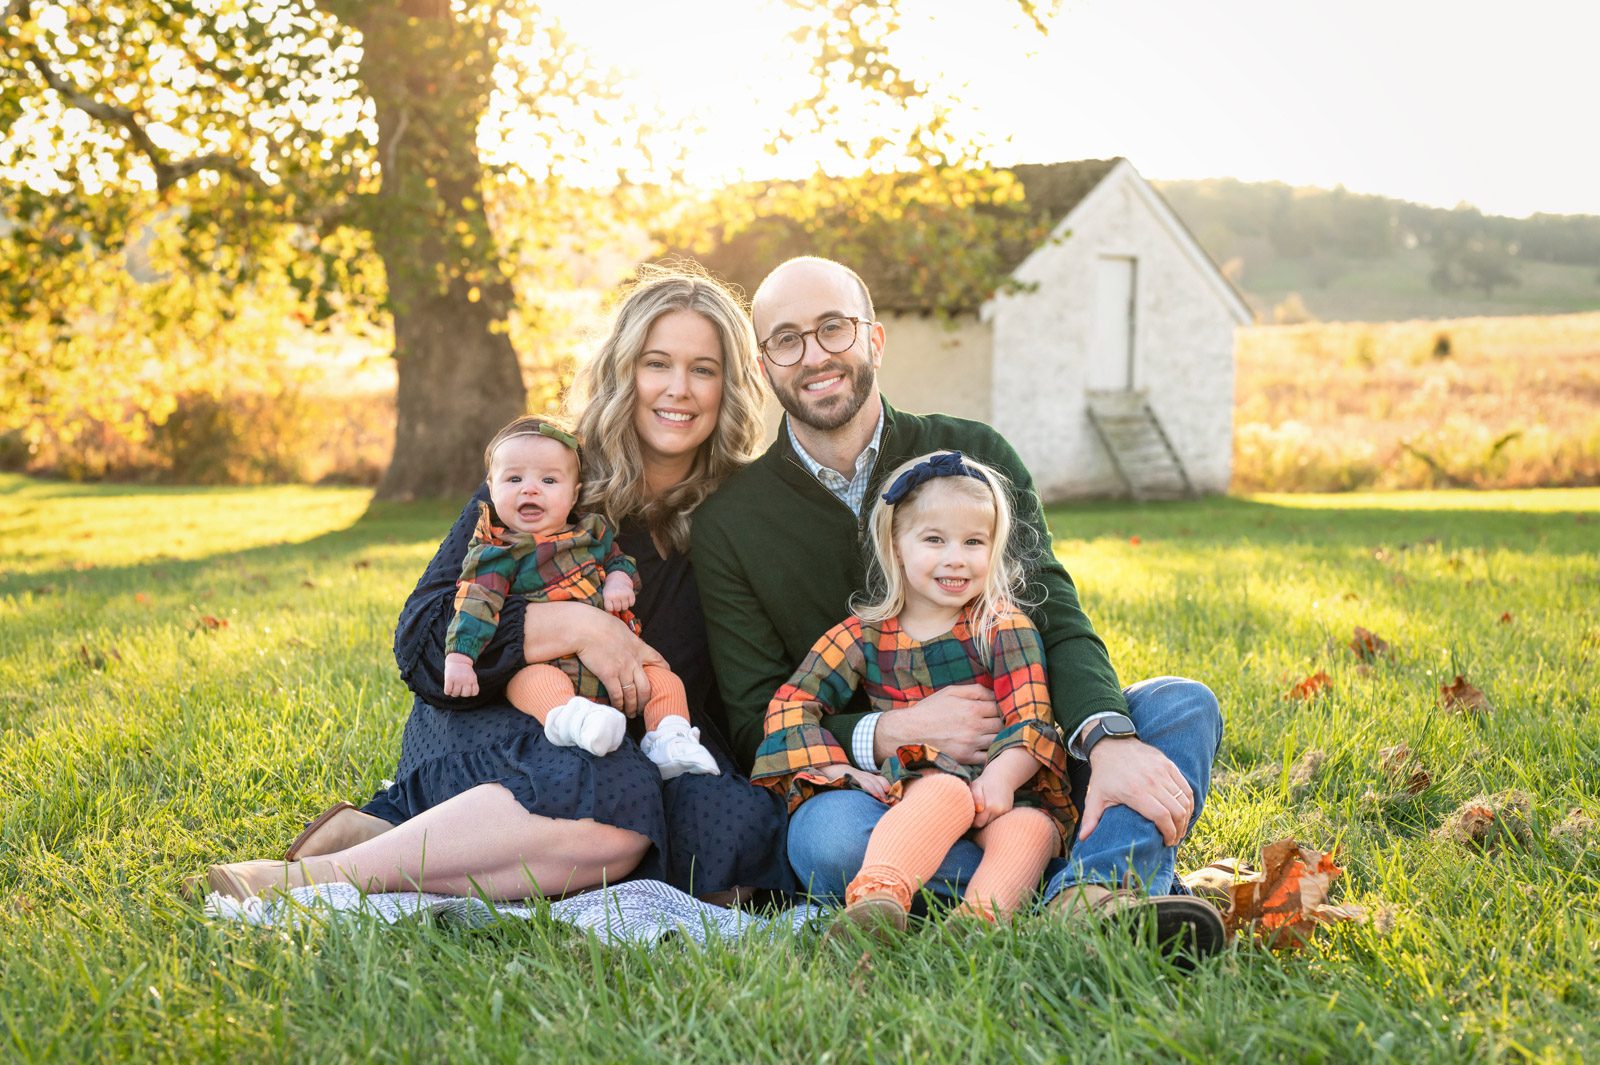 a mom and dad sitting in the grass with their two young daughters on their lap as everyone smiles at the camera while the sun shines through the colorful leaves in the background during a fall mini session